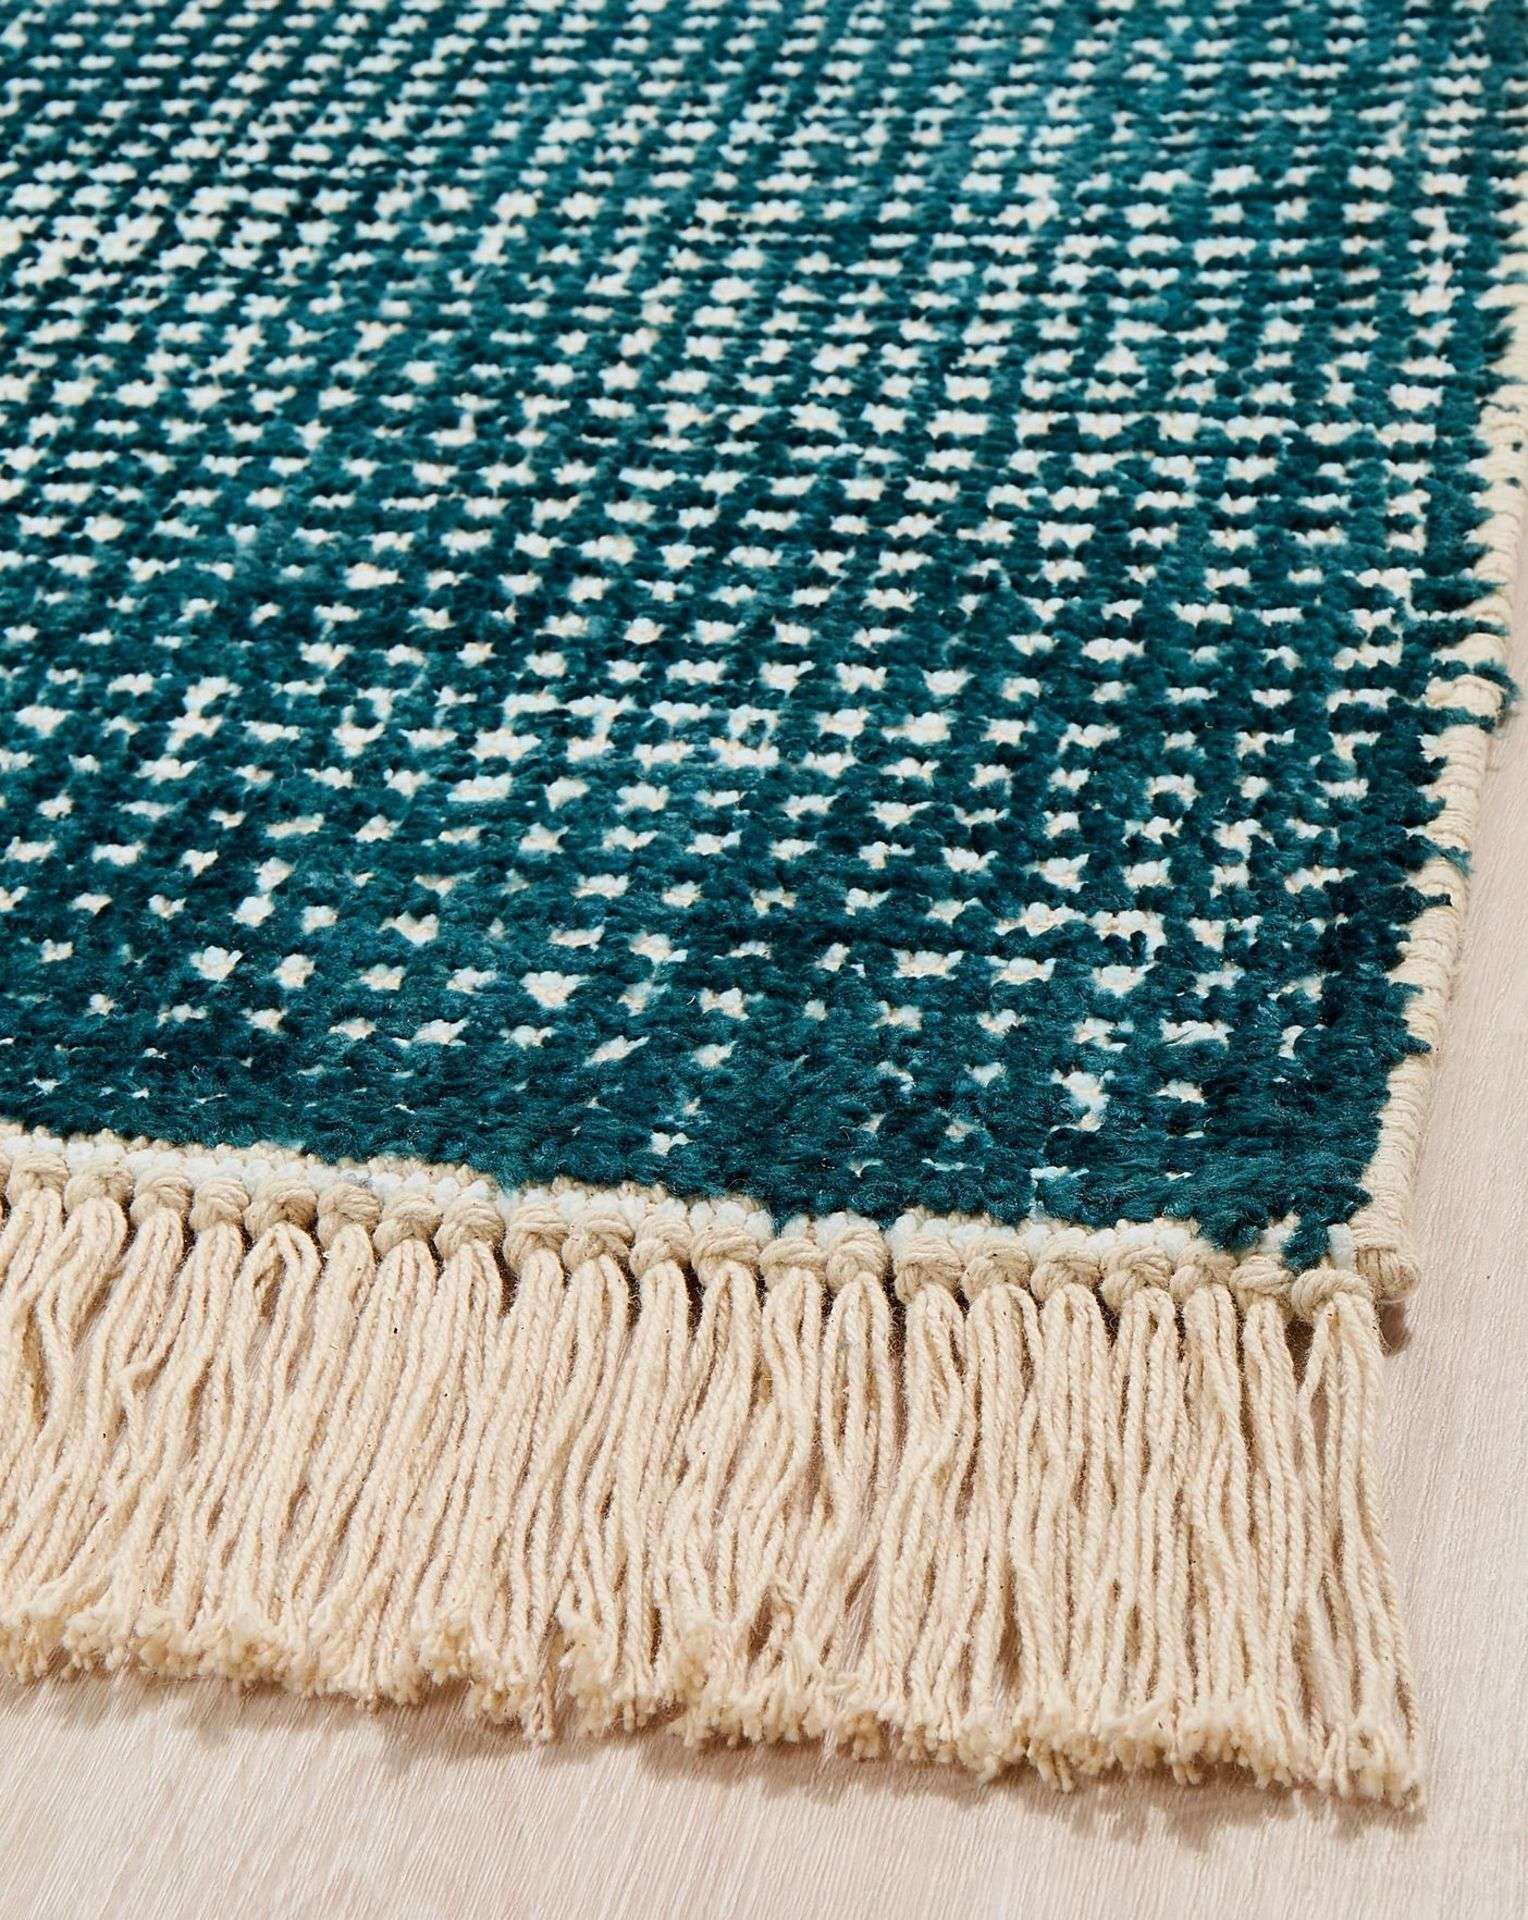 2x BRAND NEW Hallie Woven Fringe Rug 80CM X 150CM. TEAL. RRP £69 EACH. A woven design that is soft - Image 3 of 3